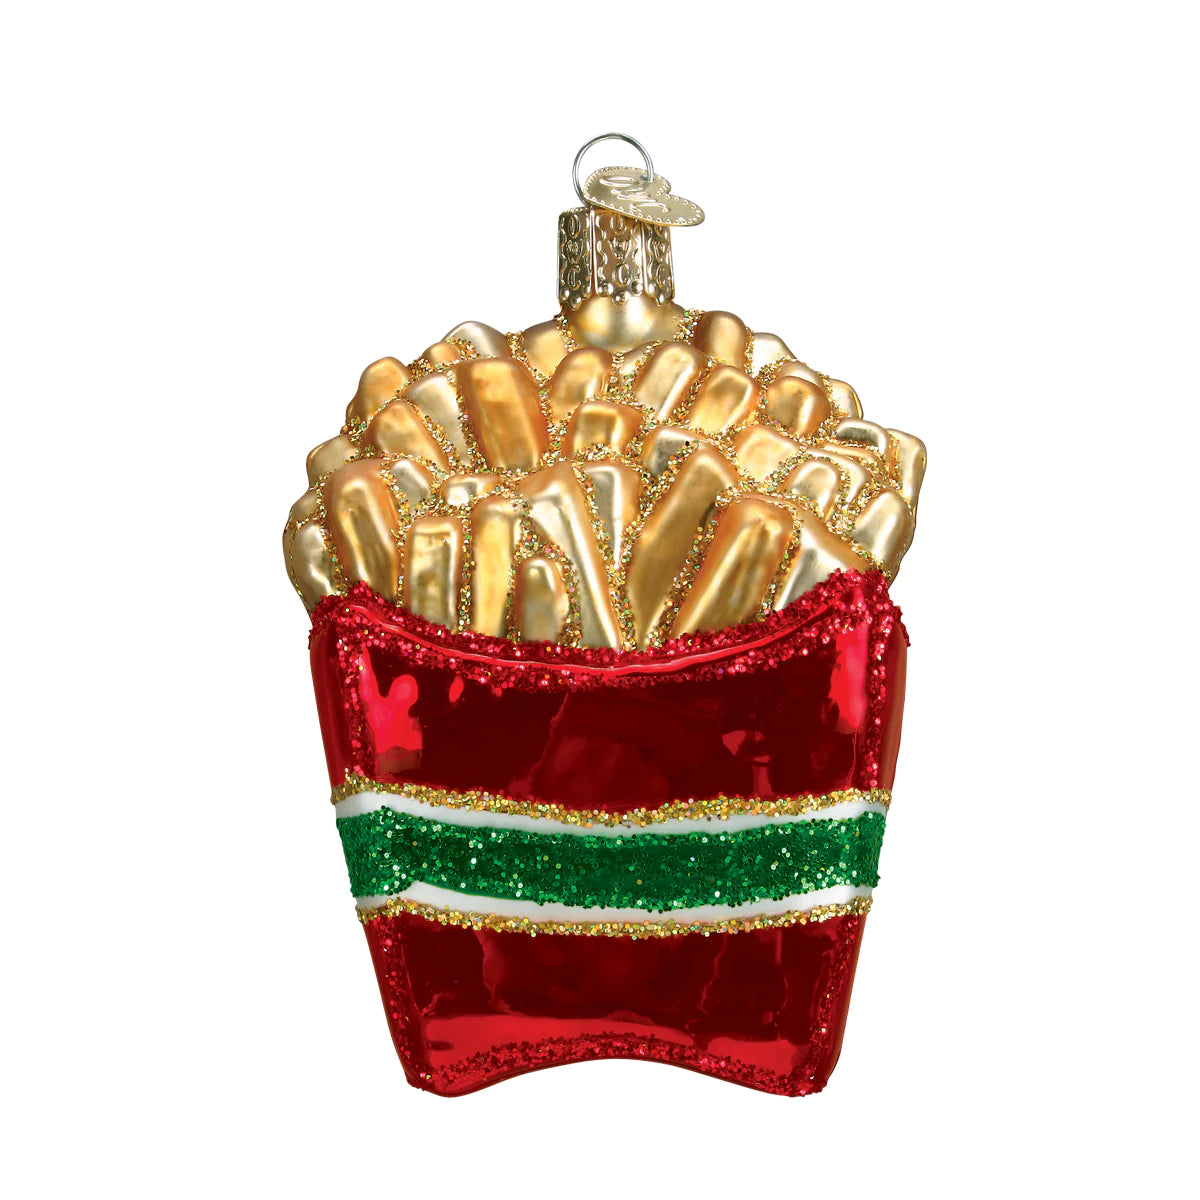 French Fries Ornament  Old World Christmas   